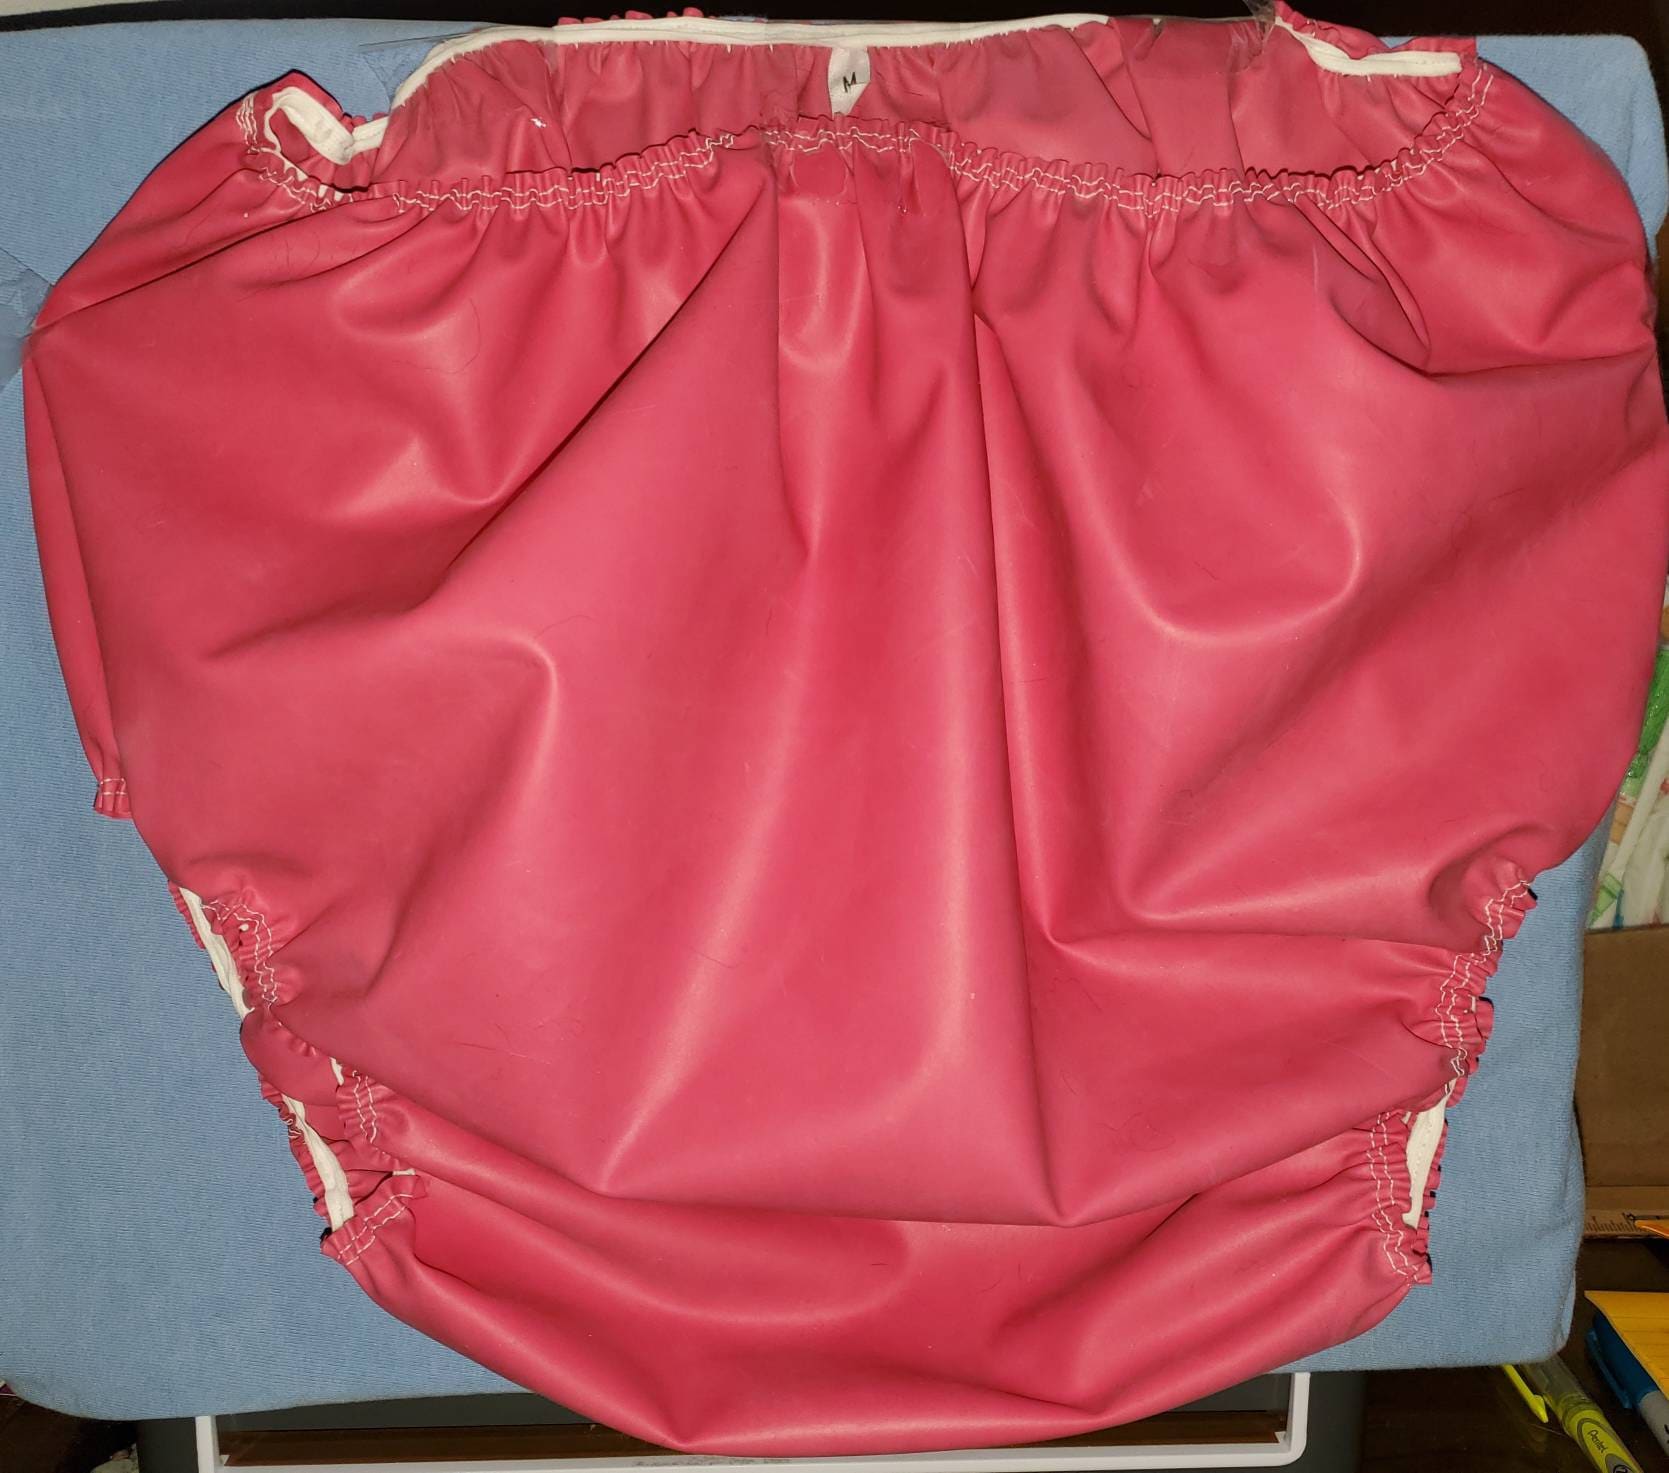 ABDL Latex Rubberized Med-Large Waterproof Diaper Cover. Darker Pinkish In  Color.